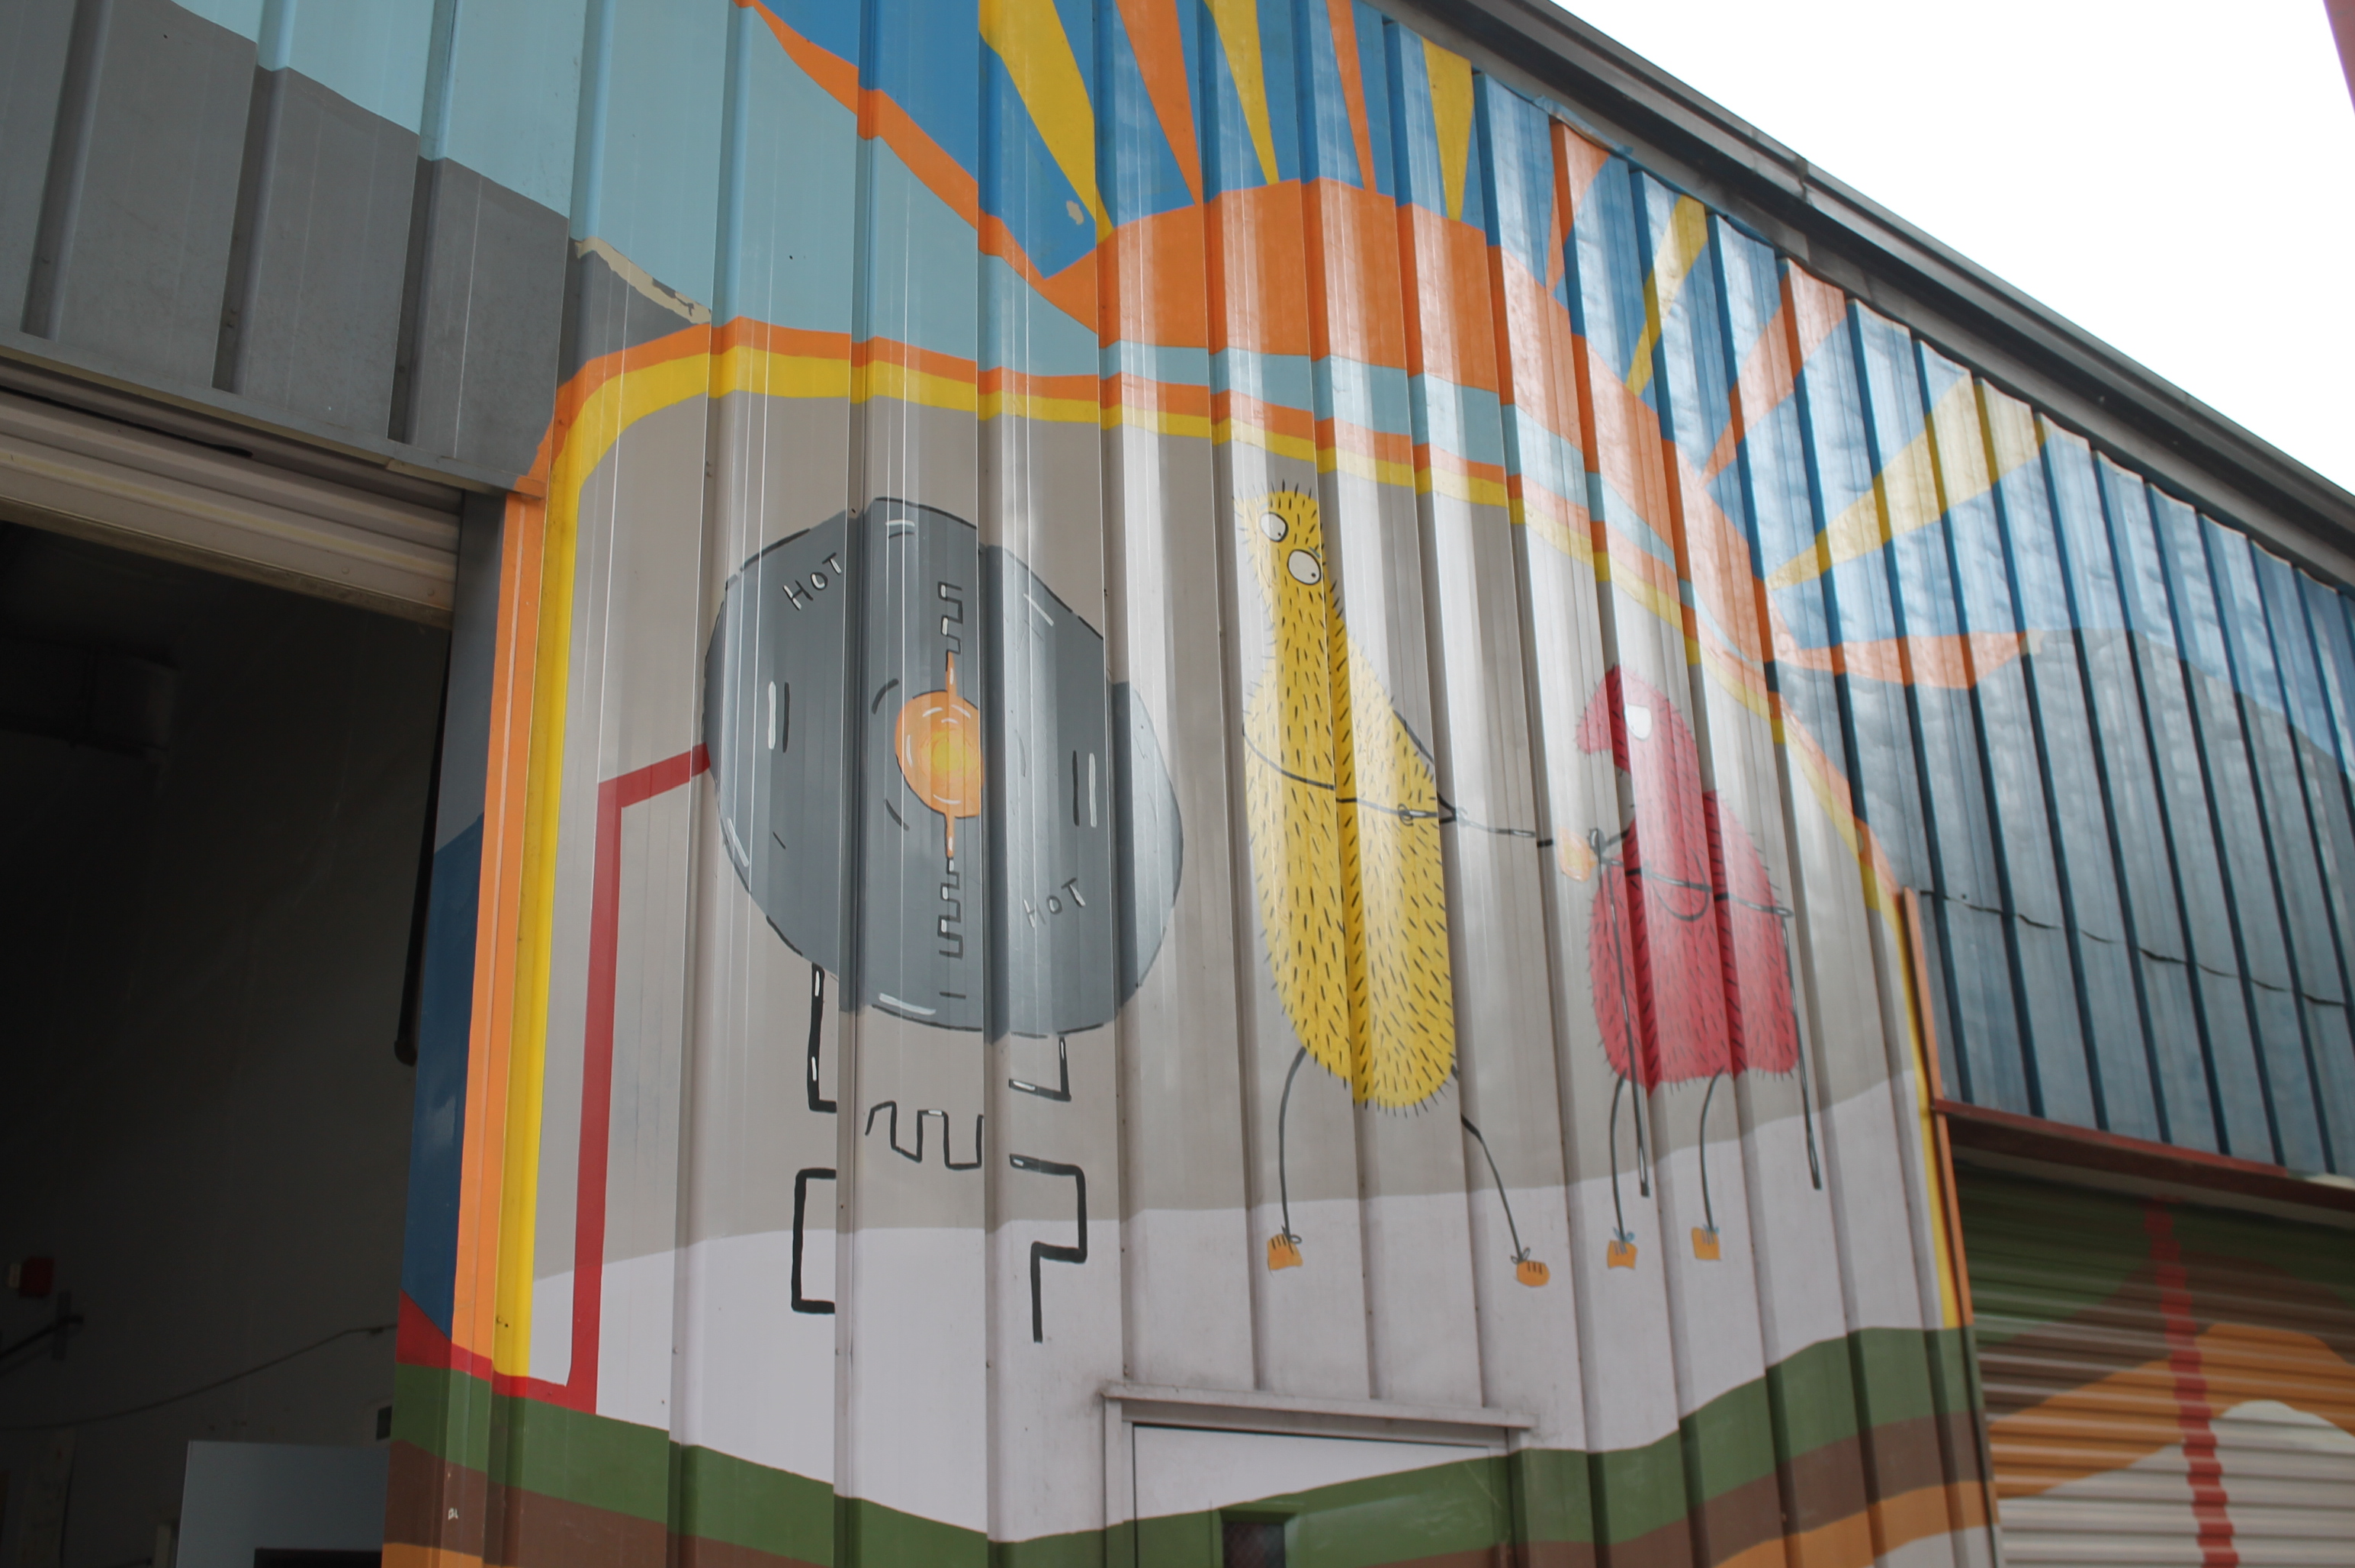 A colorful mural depicts the process by which gas is turned to energy to fuel the Green Energy Park.